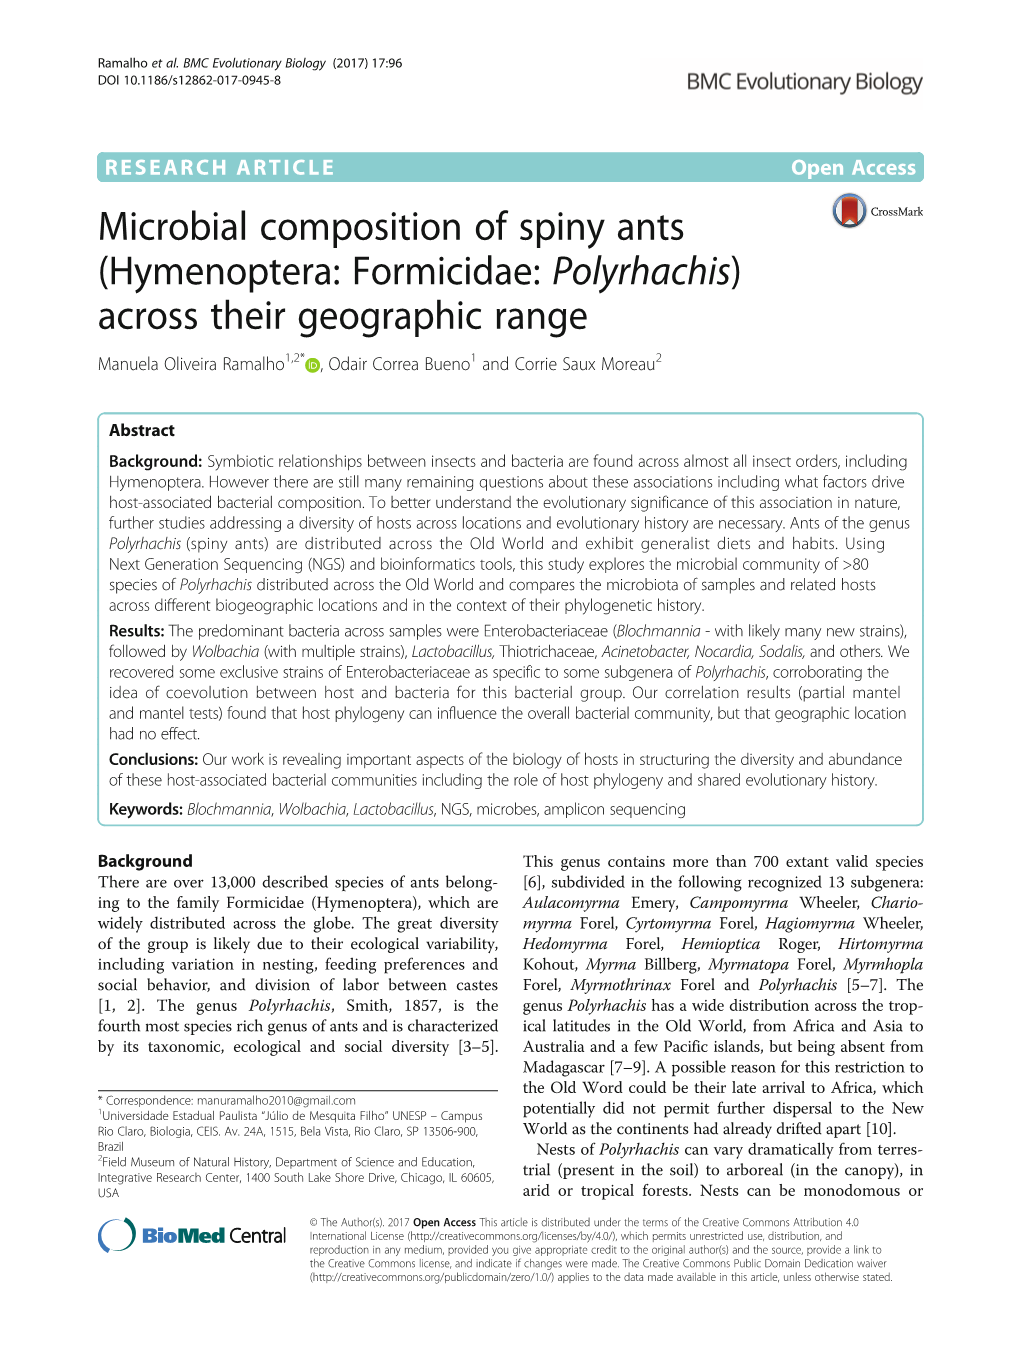 Microbial Composition of Spiny Ants (Hymenoptera: Formicidae